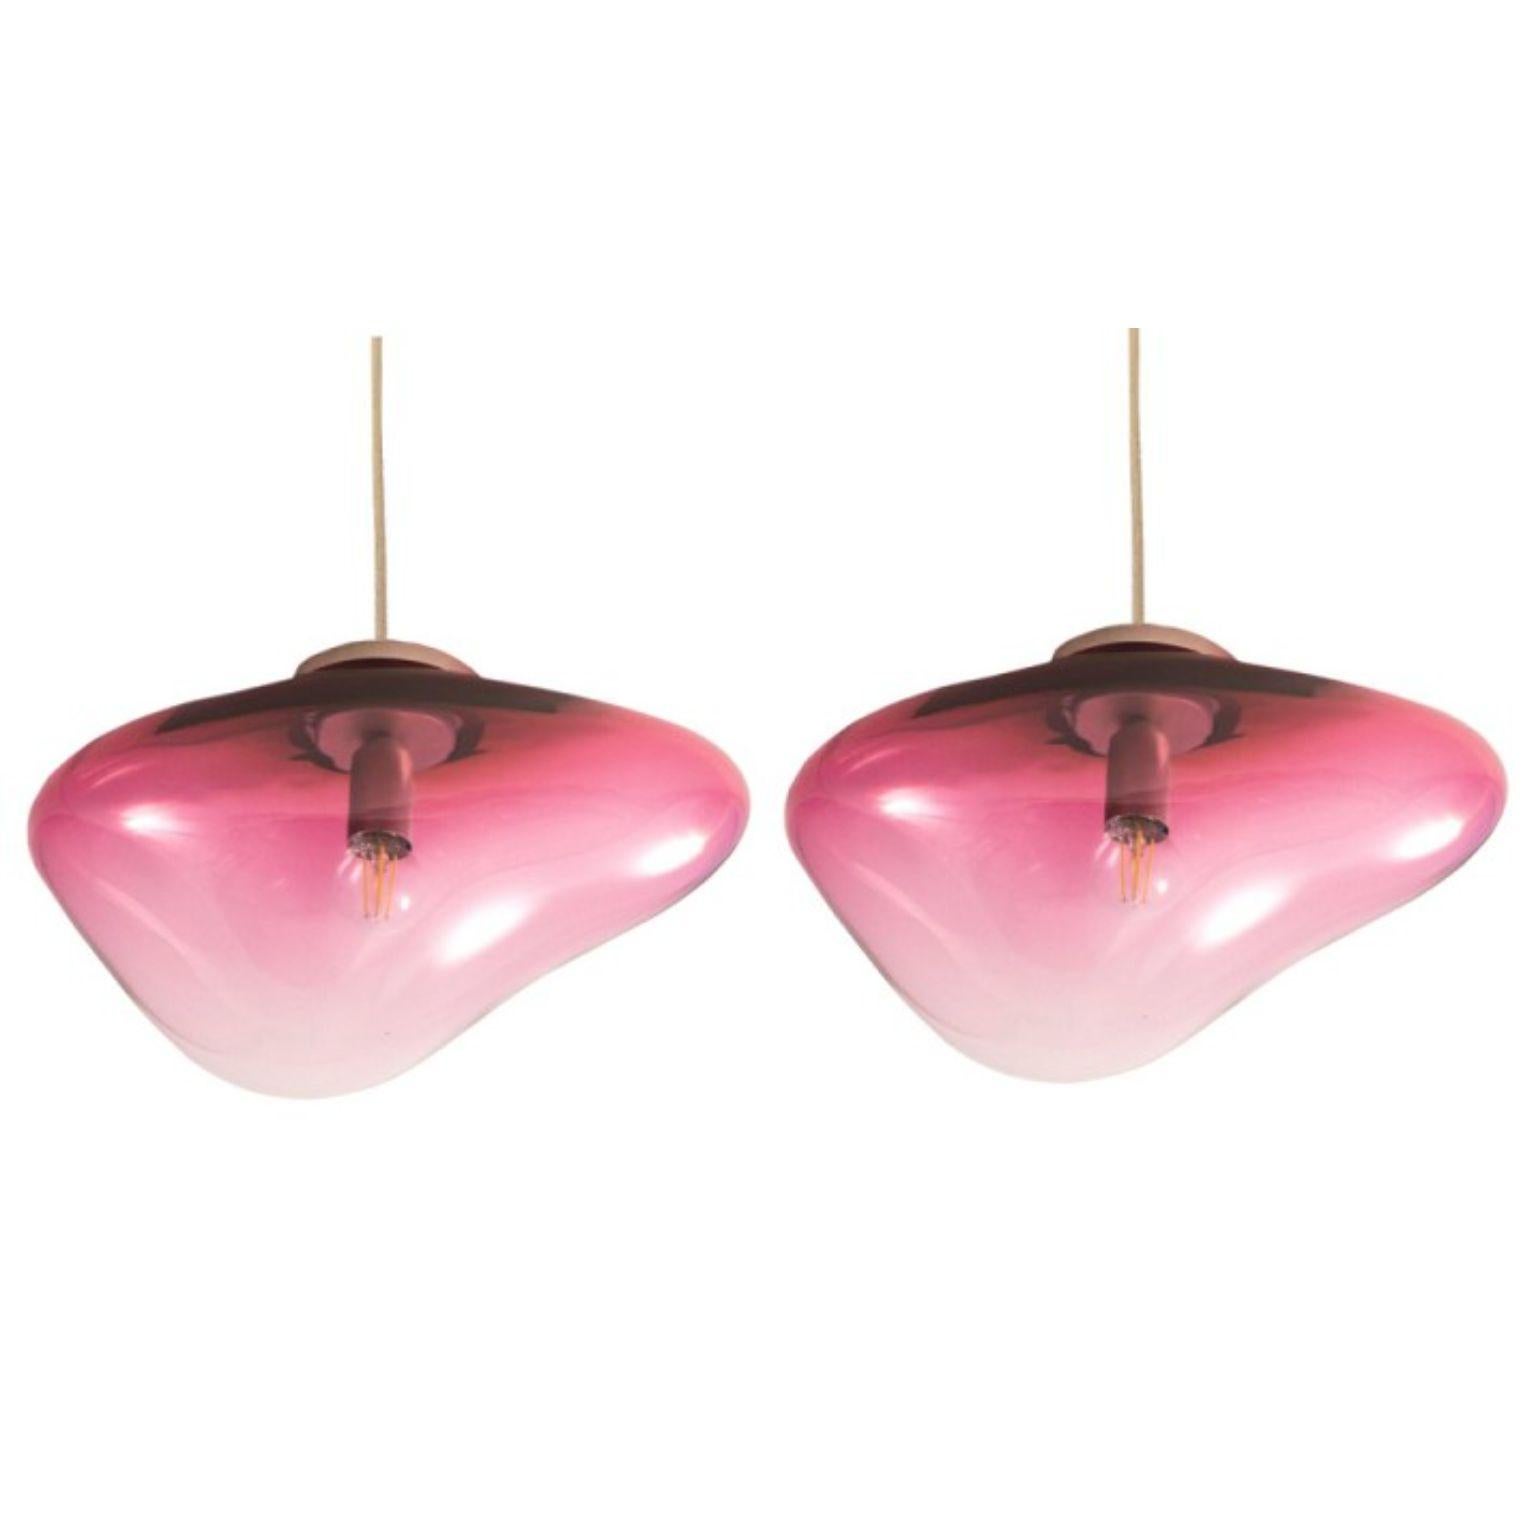 Set of 2 Planetoide Erosi Brilliant ruby pendants by ELOA
No UL listed 
Material: glass, steel, silver, LED Bulb
Dimensions: D 30 x W 30 x H 250 cm
Also available in different colours and dimensions.

All our lamps can be wired according to each